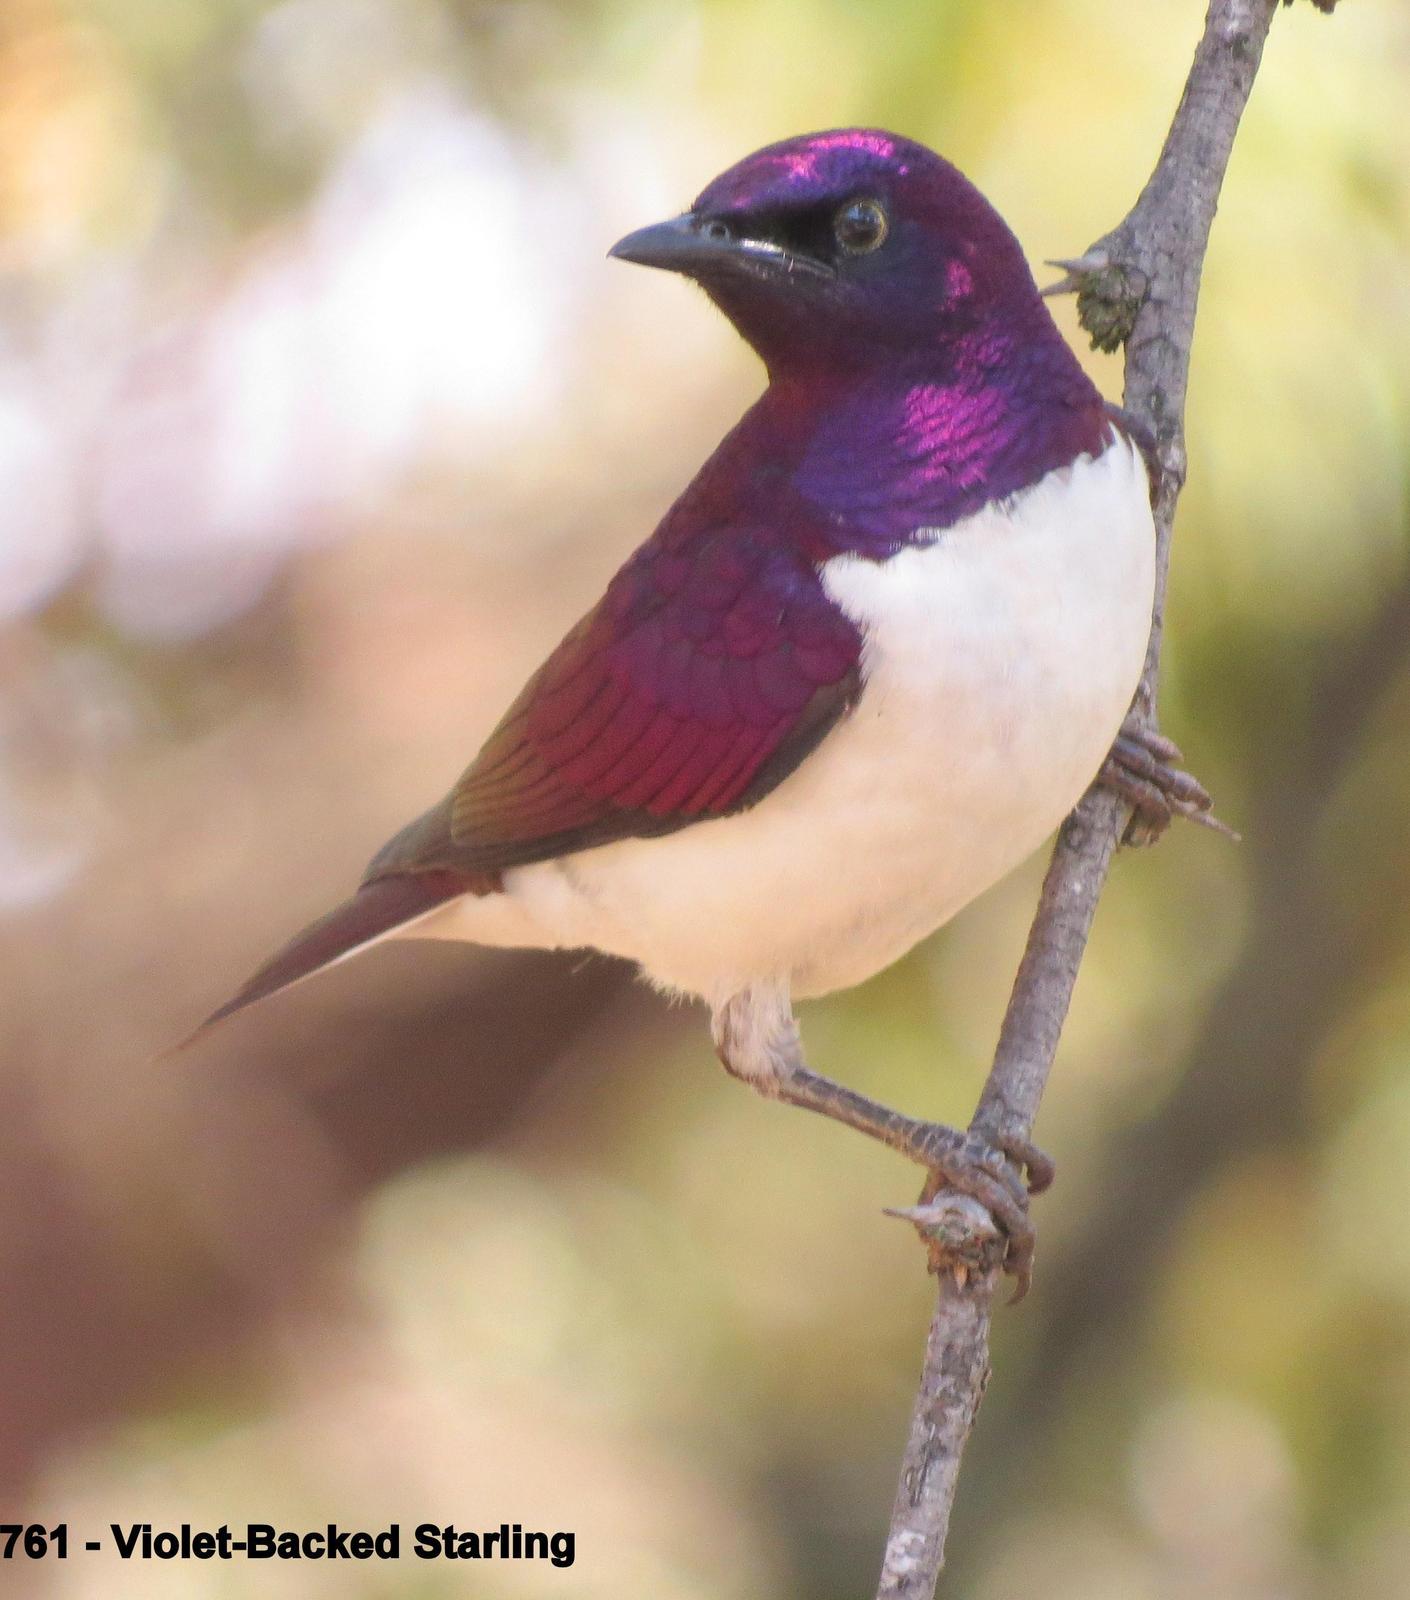 Violet-backed Starling Photo by Richard  Lowe